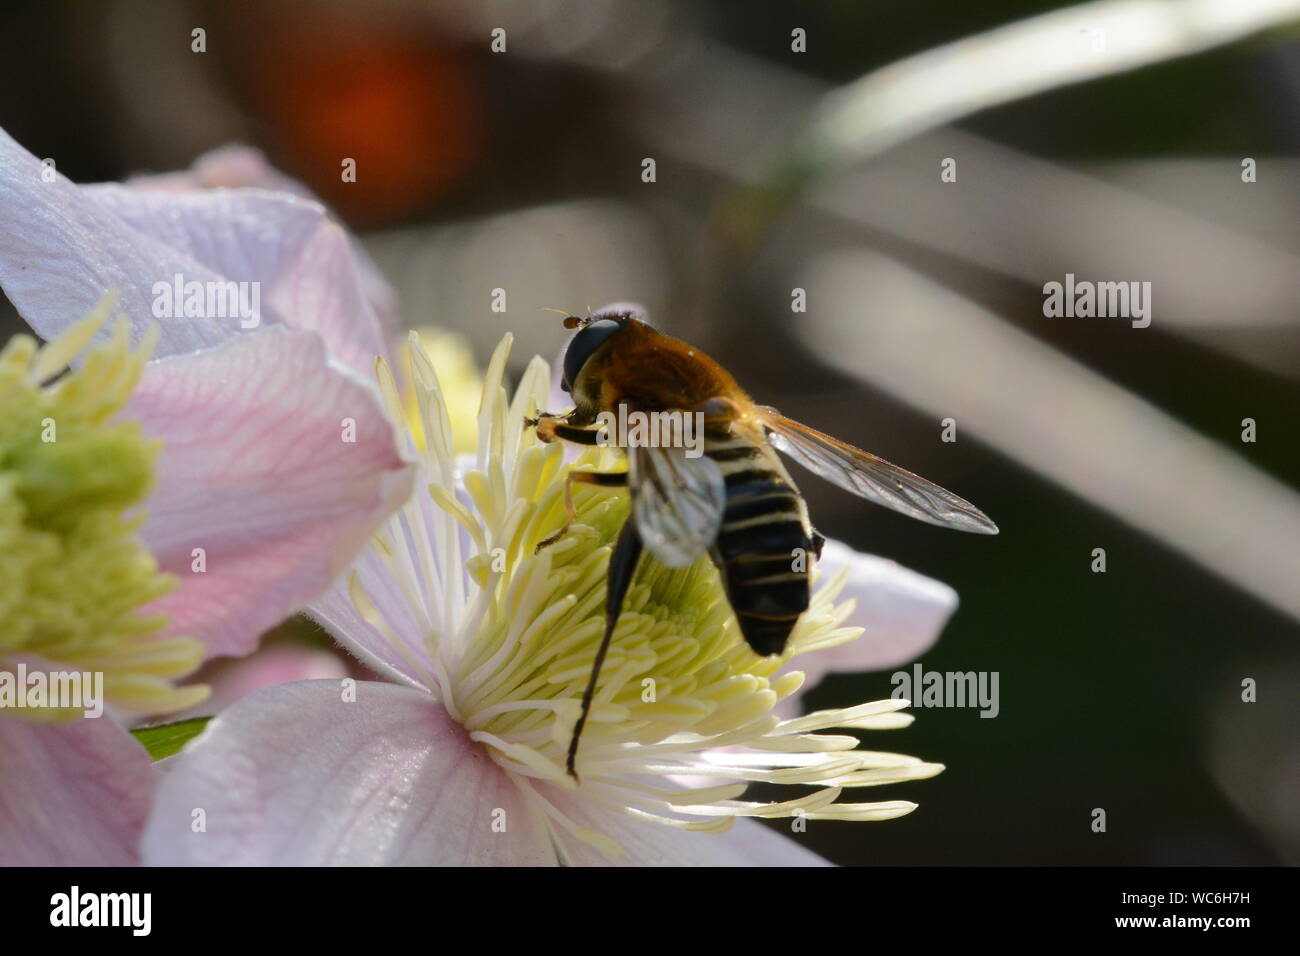 Detail Shot Of Bee On Flowers Stock Photo